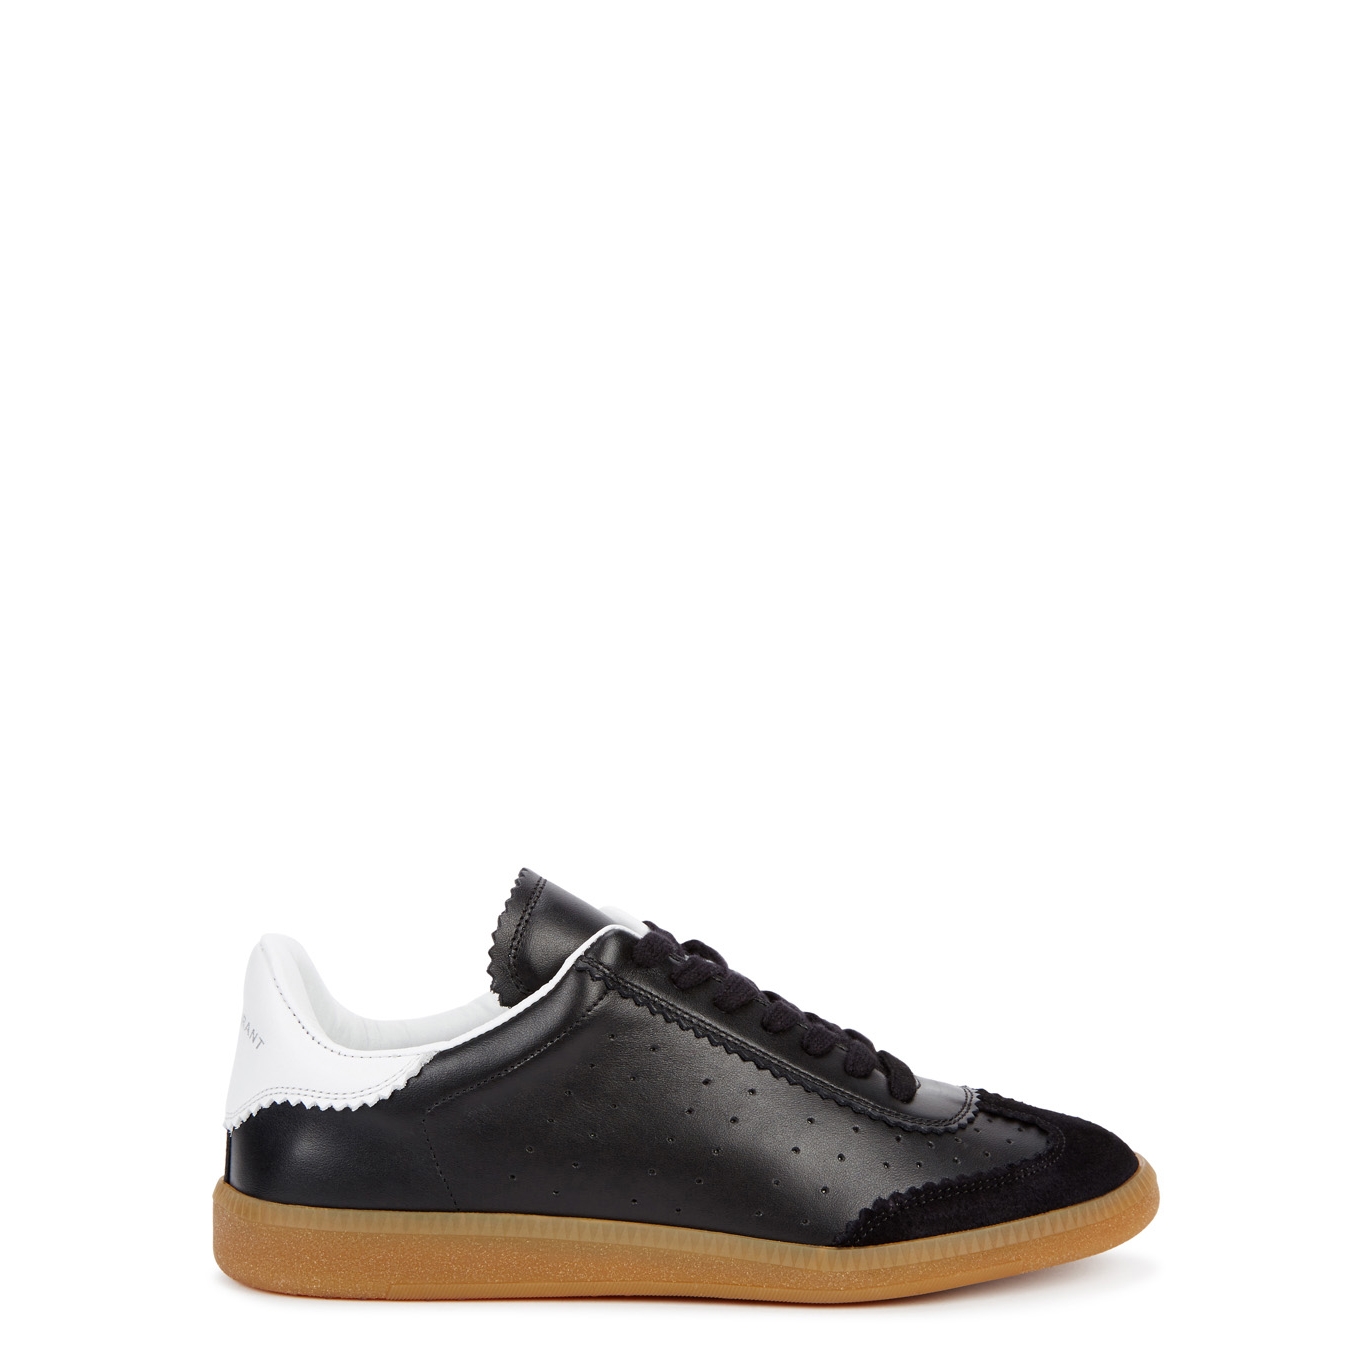 Isabel Marant Bryce Black Leather Sneakers - 3